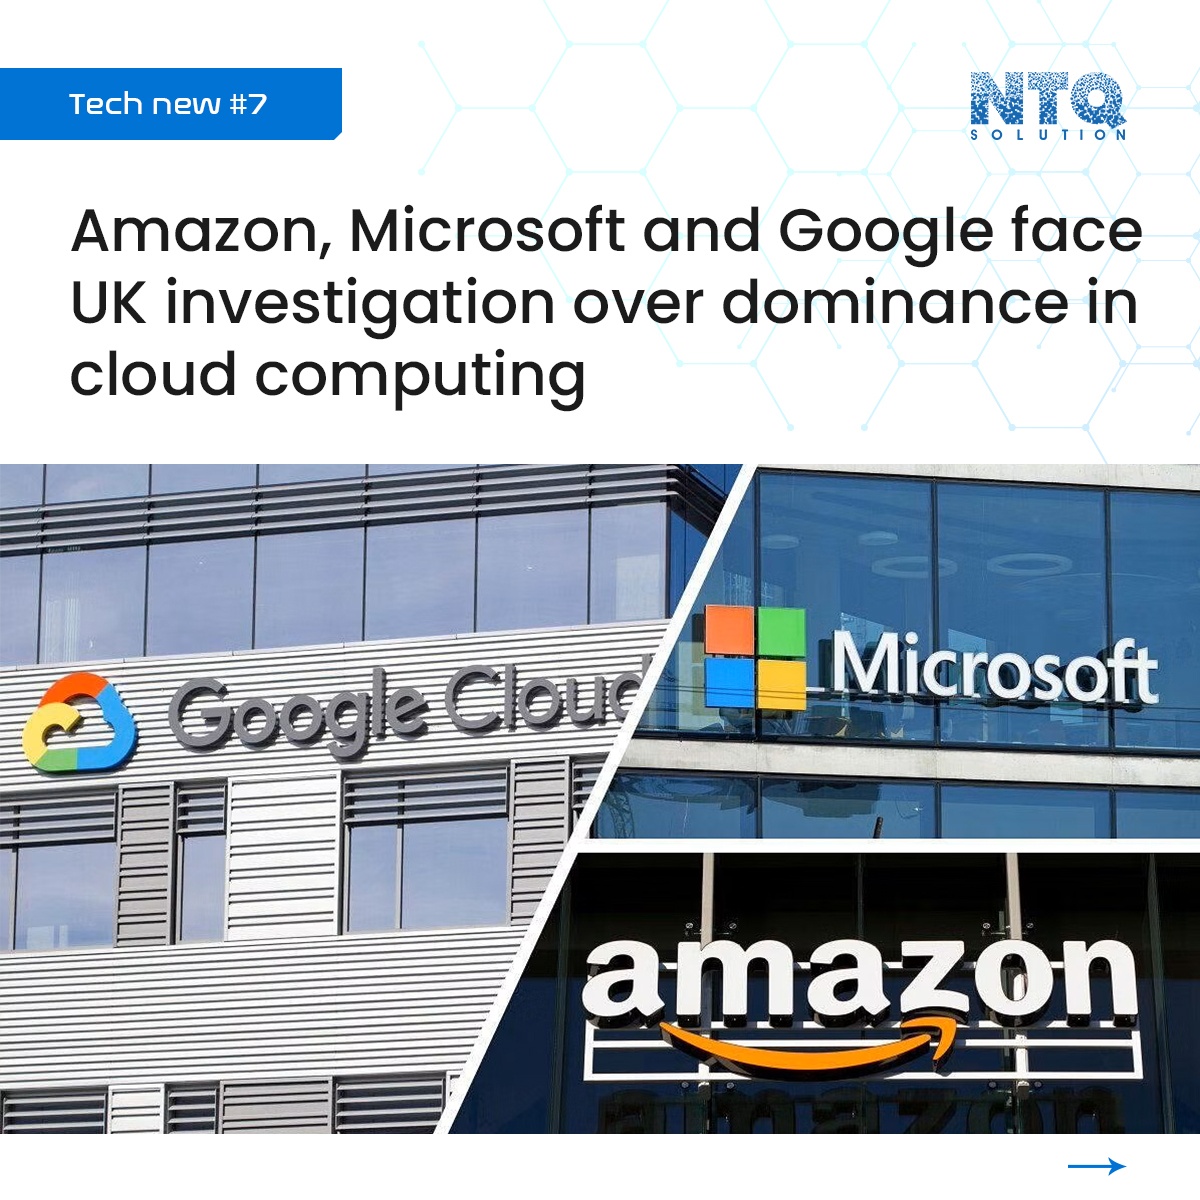 Amazon, Microsoft and Google face UK investigation over dominance in cloud computing